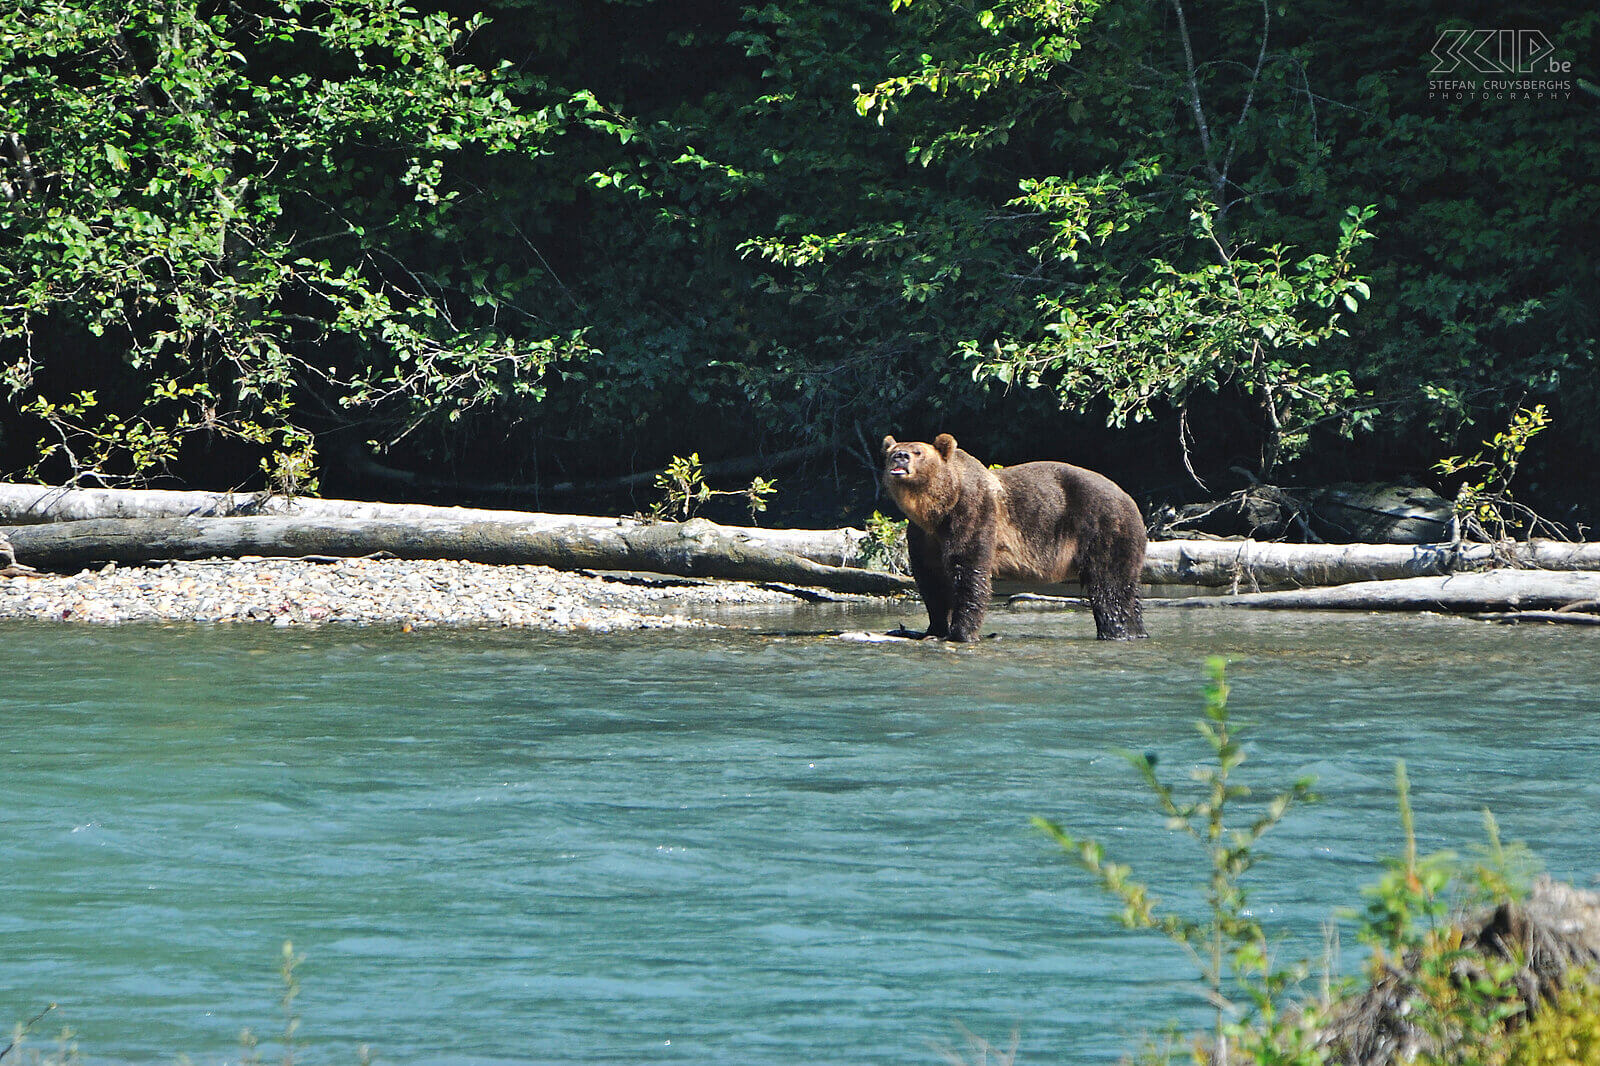 Bute Inlet - Brown bear From Campbell River we leave for a trip to Bute Inlet in the Great Bear Rainforest. We stayed at some observation huts where we could spot four brown bears during 2 hours. Brown bears found inland and in mountainous habitats are called 'grizzly bears' while brown bears living in coastal areas are called 'coastal brown bears'.<br />
 Stefan Cruysberghs